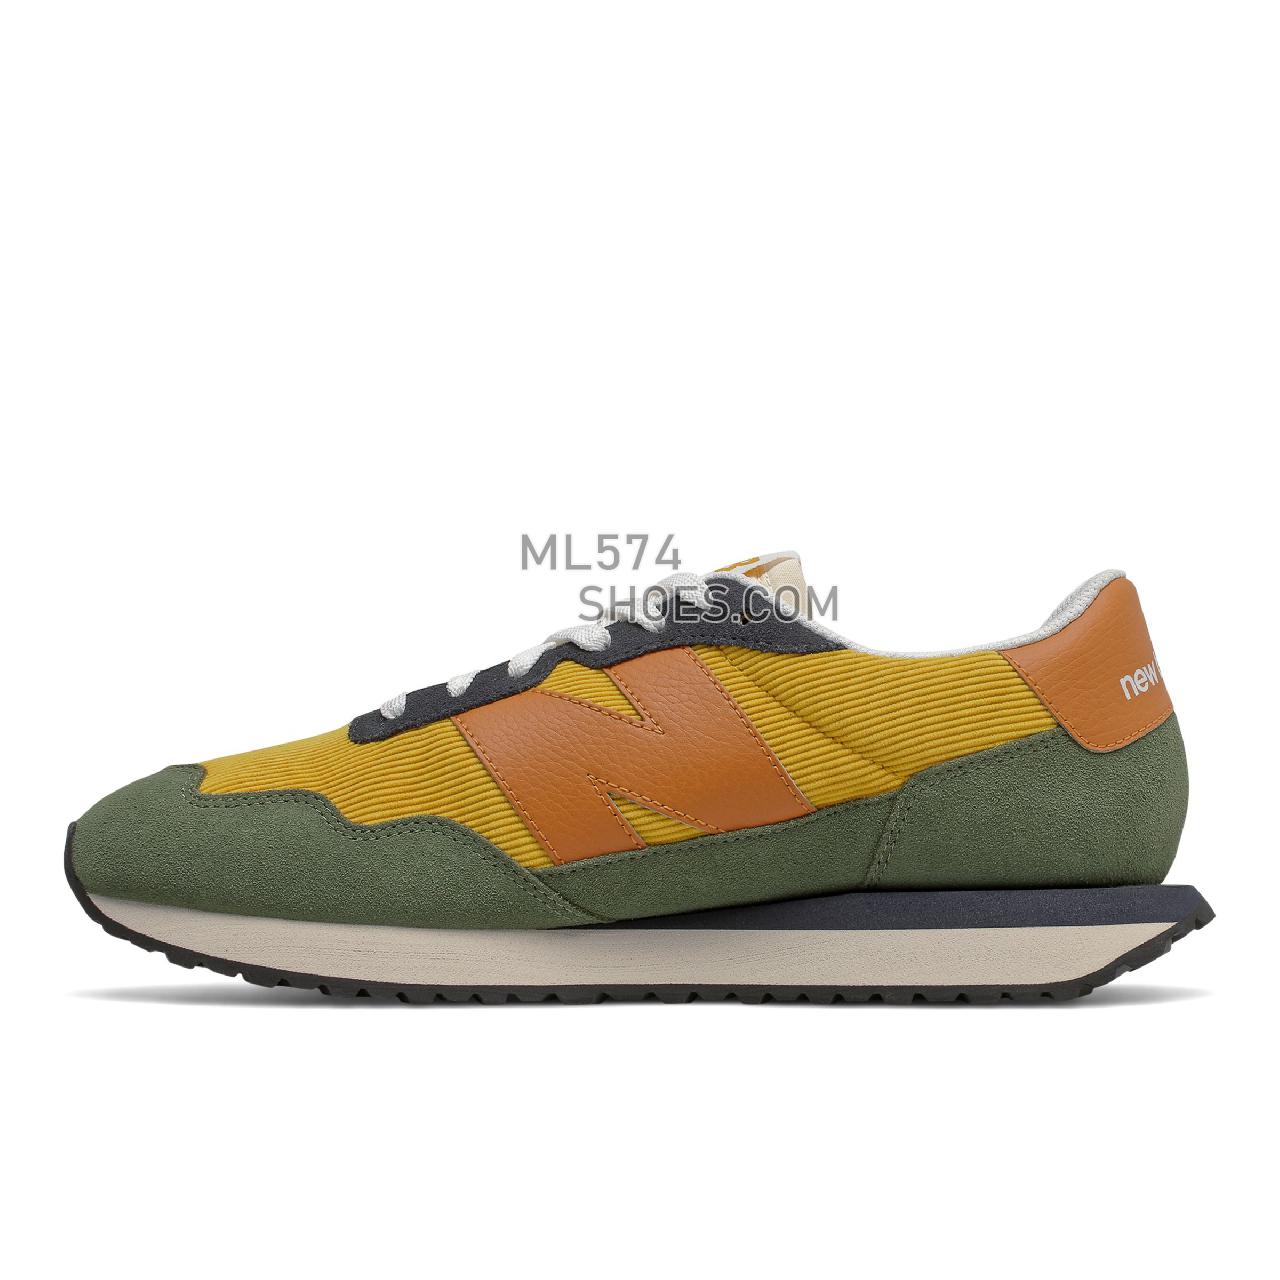 New Balance 237 - Men's Sport Style Sneakers - Harvest Gold with Madras Orange - MS237LU1